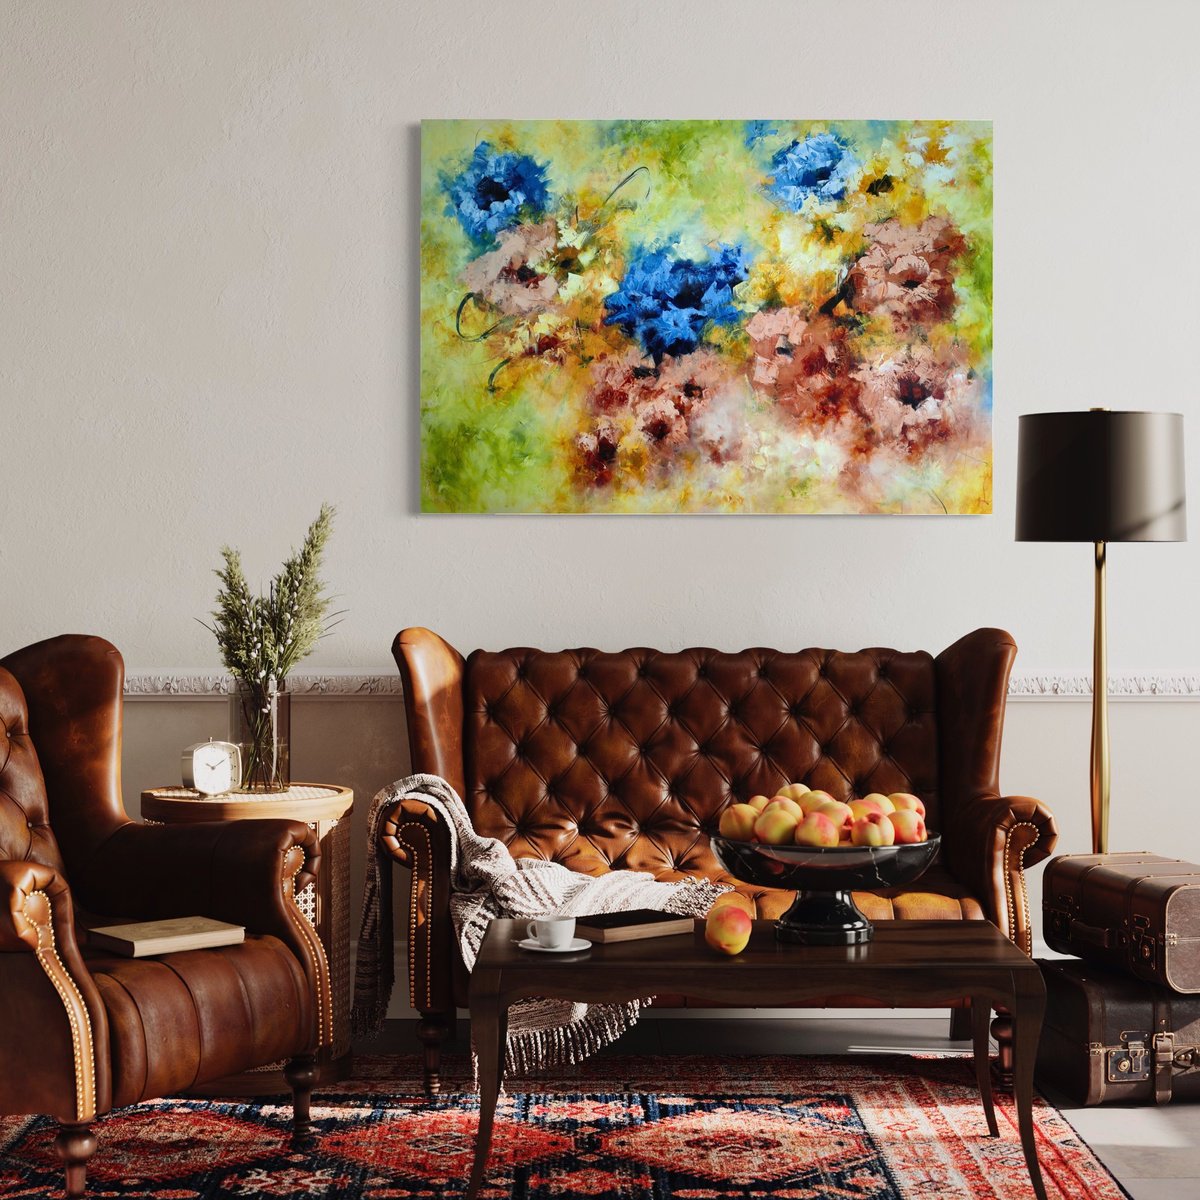 Abstract Floral Dreams from Colours of Summer collection, XXL abstract flower painting by Vera Hoi